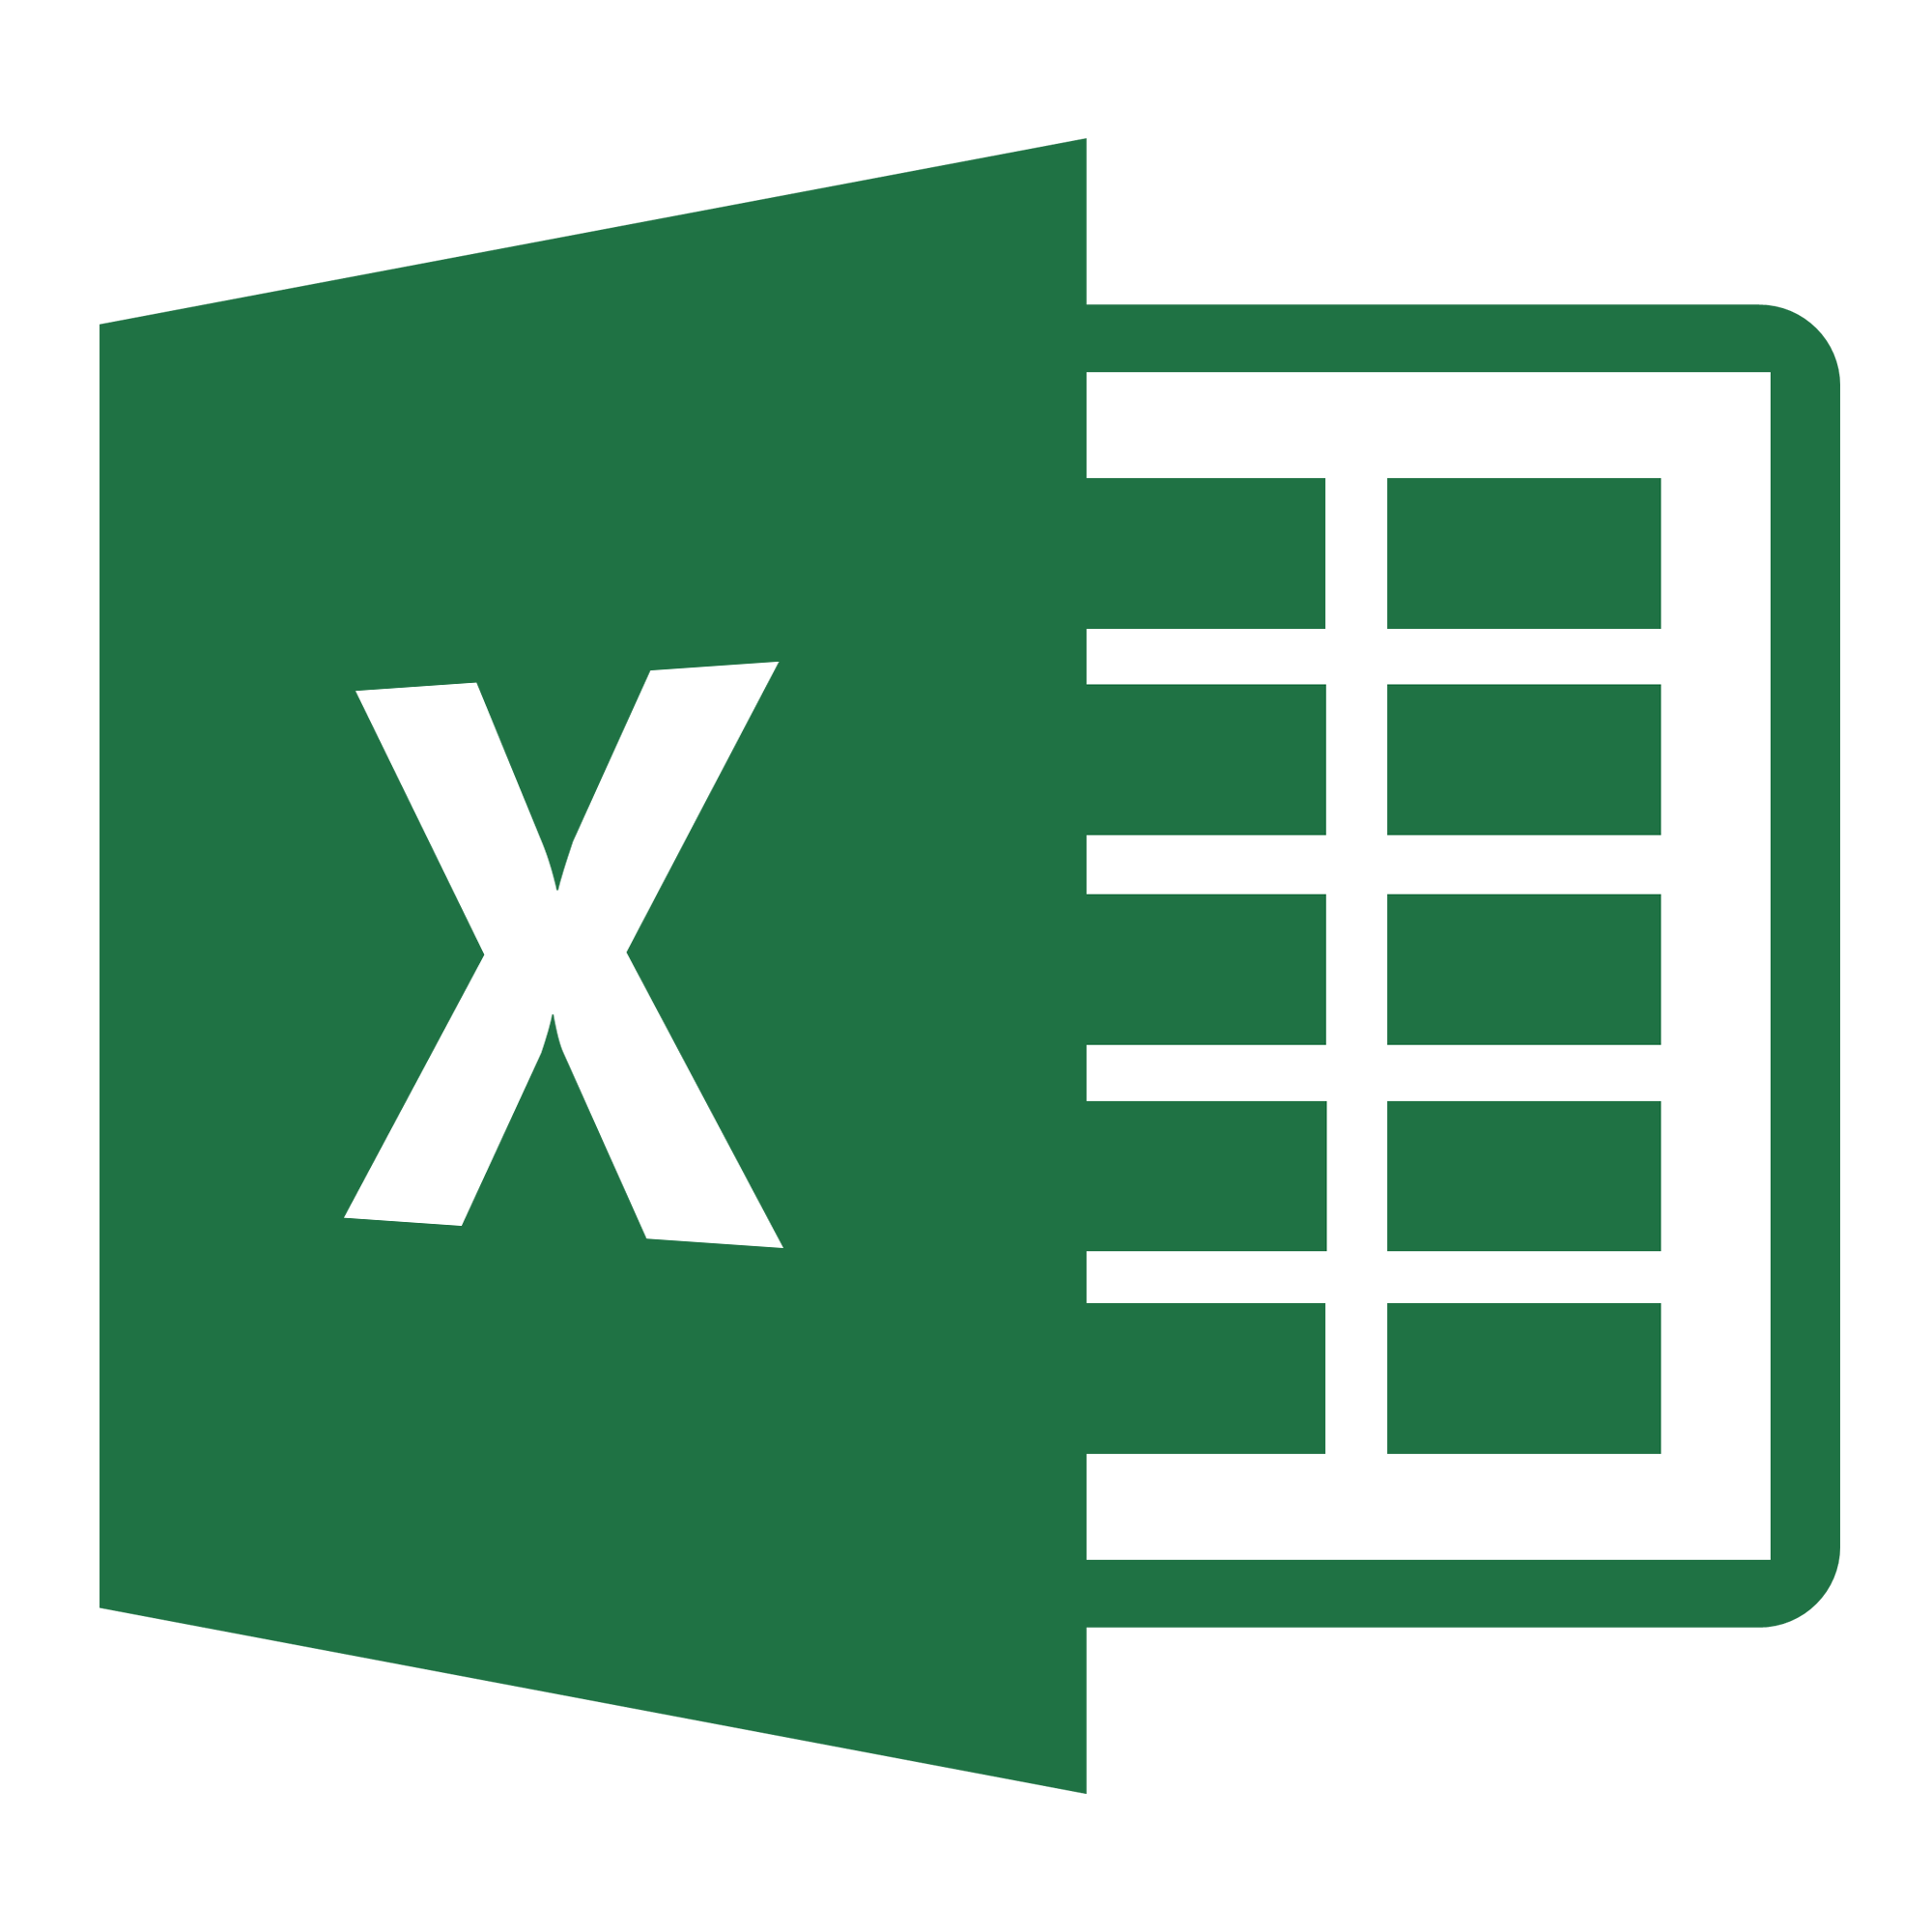 attached file is in Excel Document Format